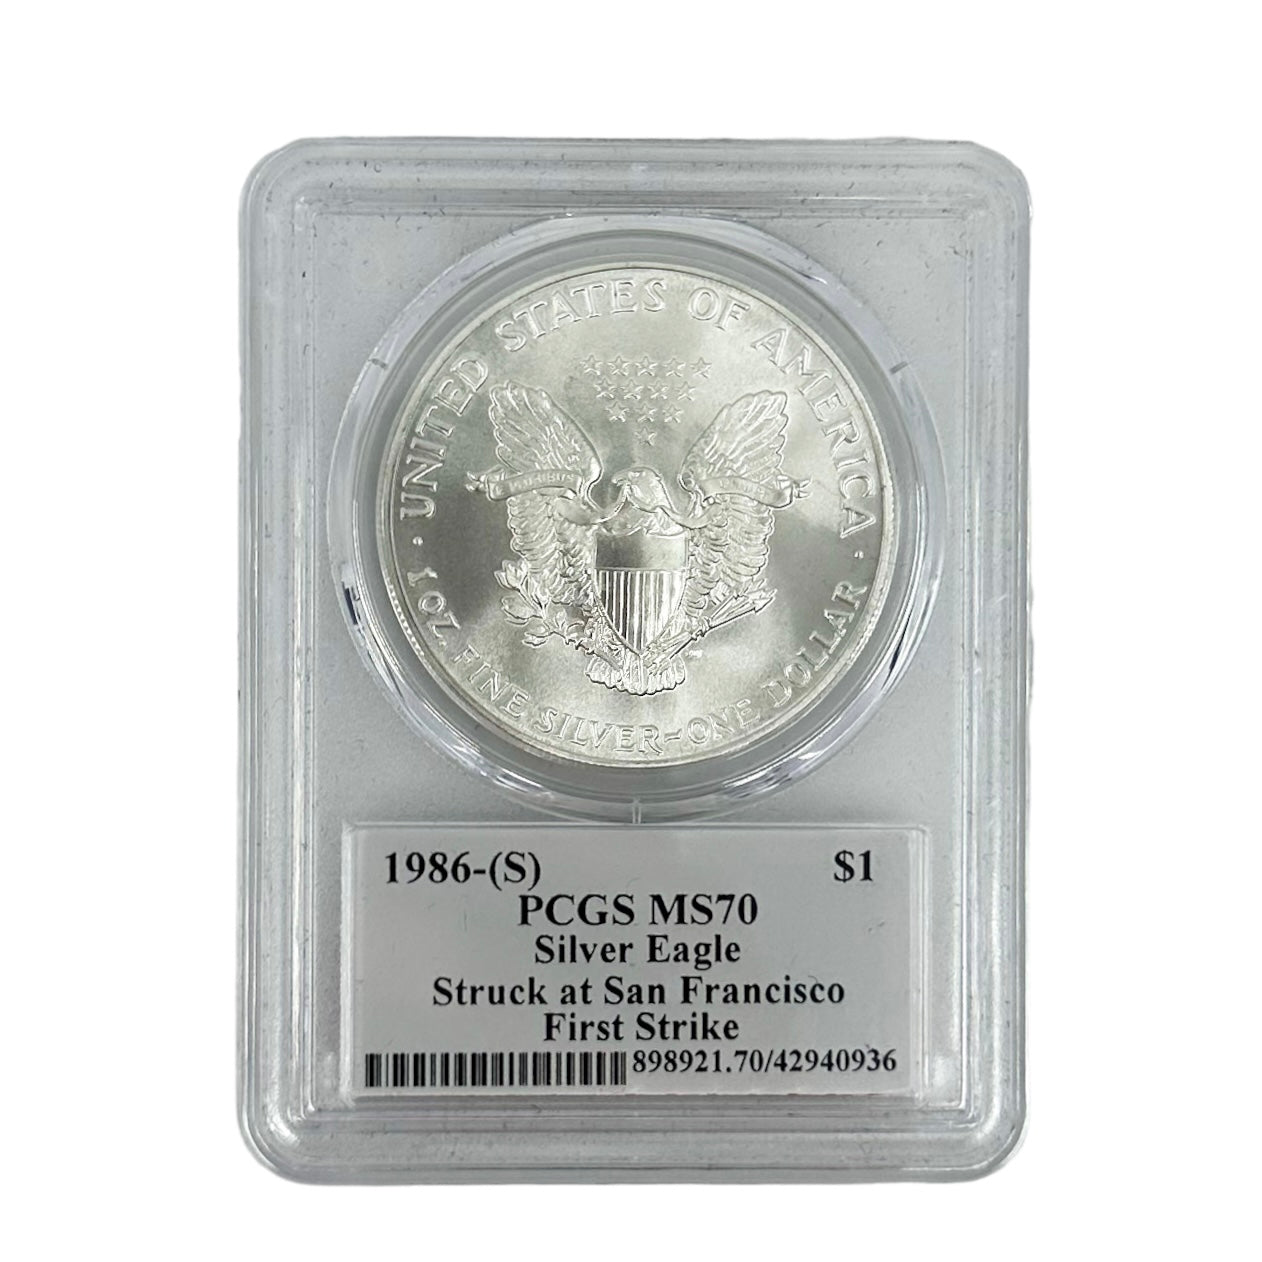 1986-(S) - FIRST STRIKE - $1 American Silver Eagle - Struck at San Francisco - PCGS MS70 - Signed by John Mercanti (Obverse)